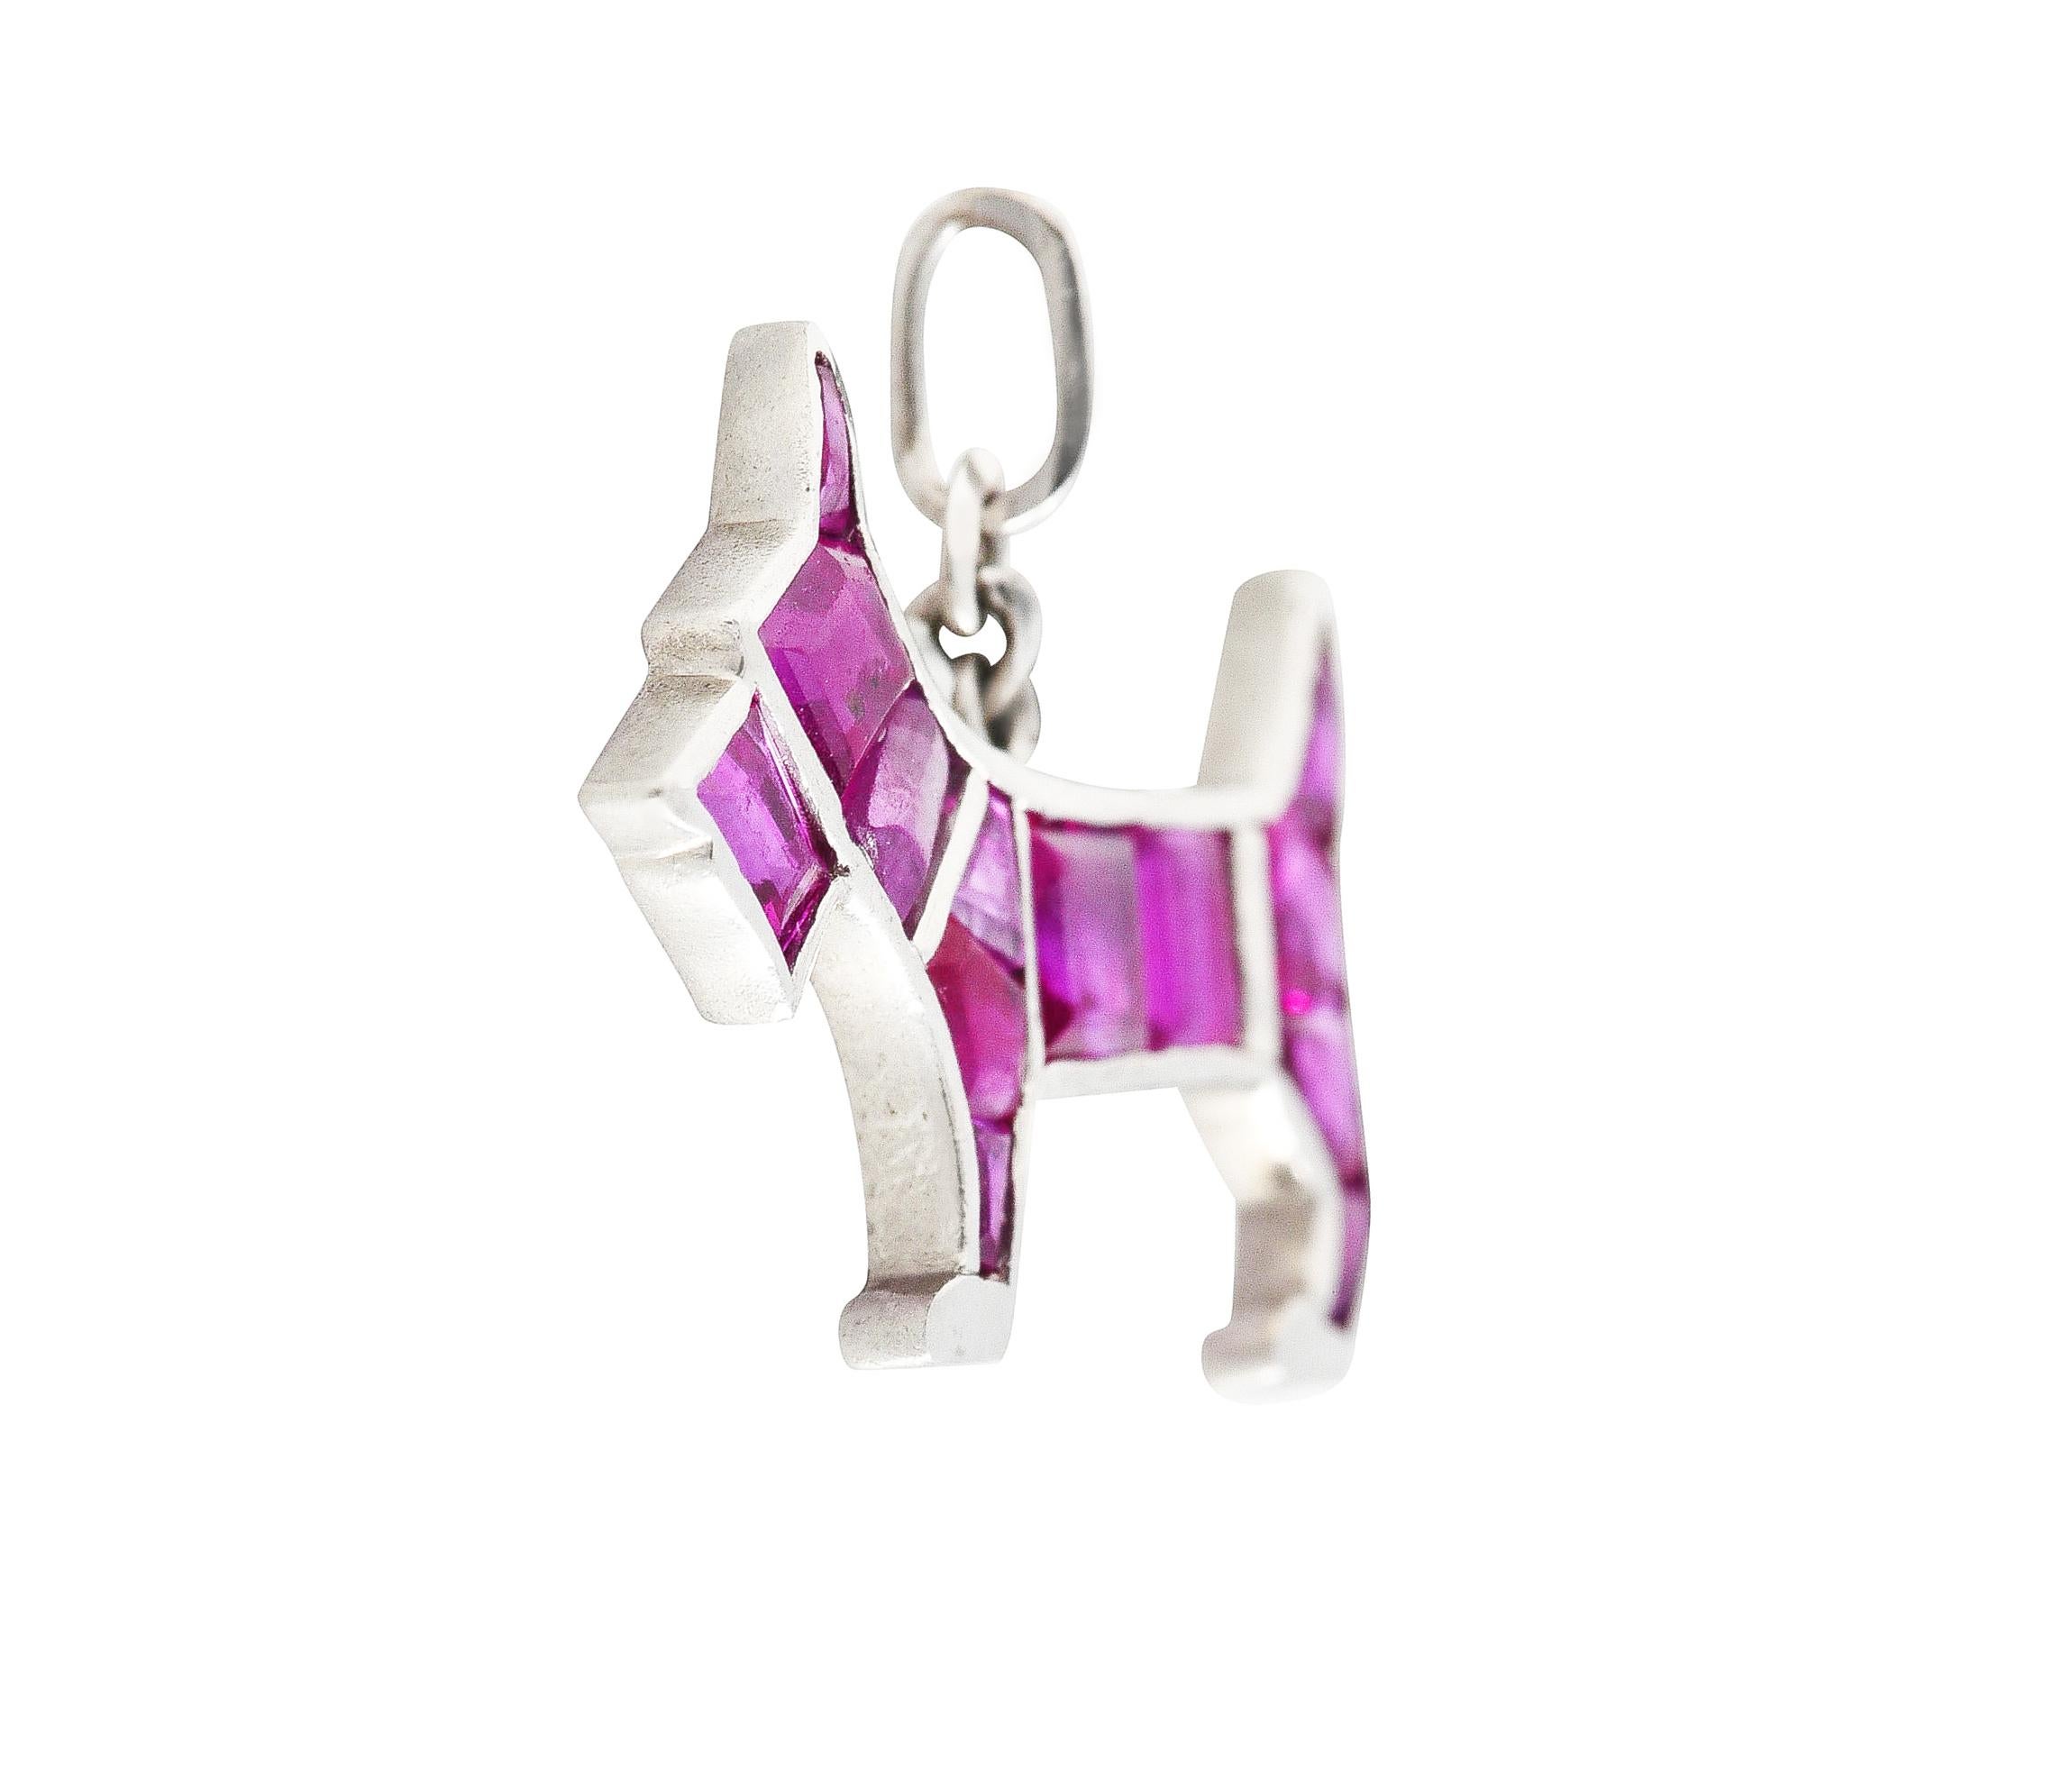 Charm is a Scottish Terrier dog with a stylized platinum frame set with calibrè cut rubies. Rubies are very well matched in purplish red in color. Weighing collectively approximately 1.15 carats. Completed by a jump ring bale. Tested as platinum.